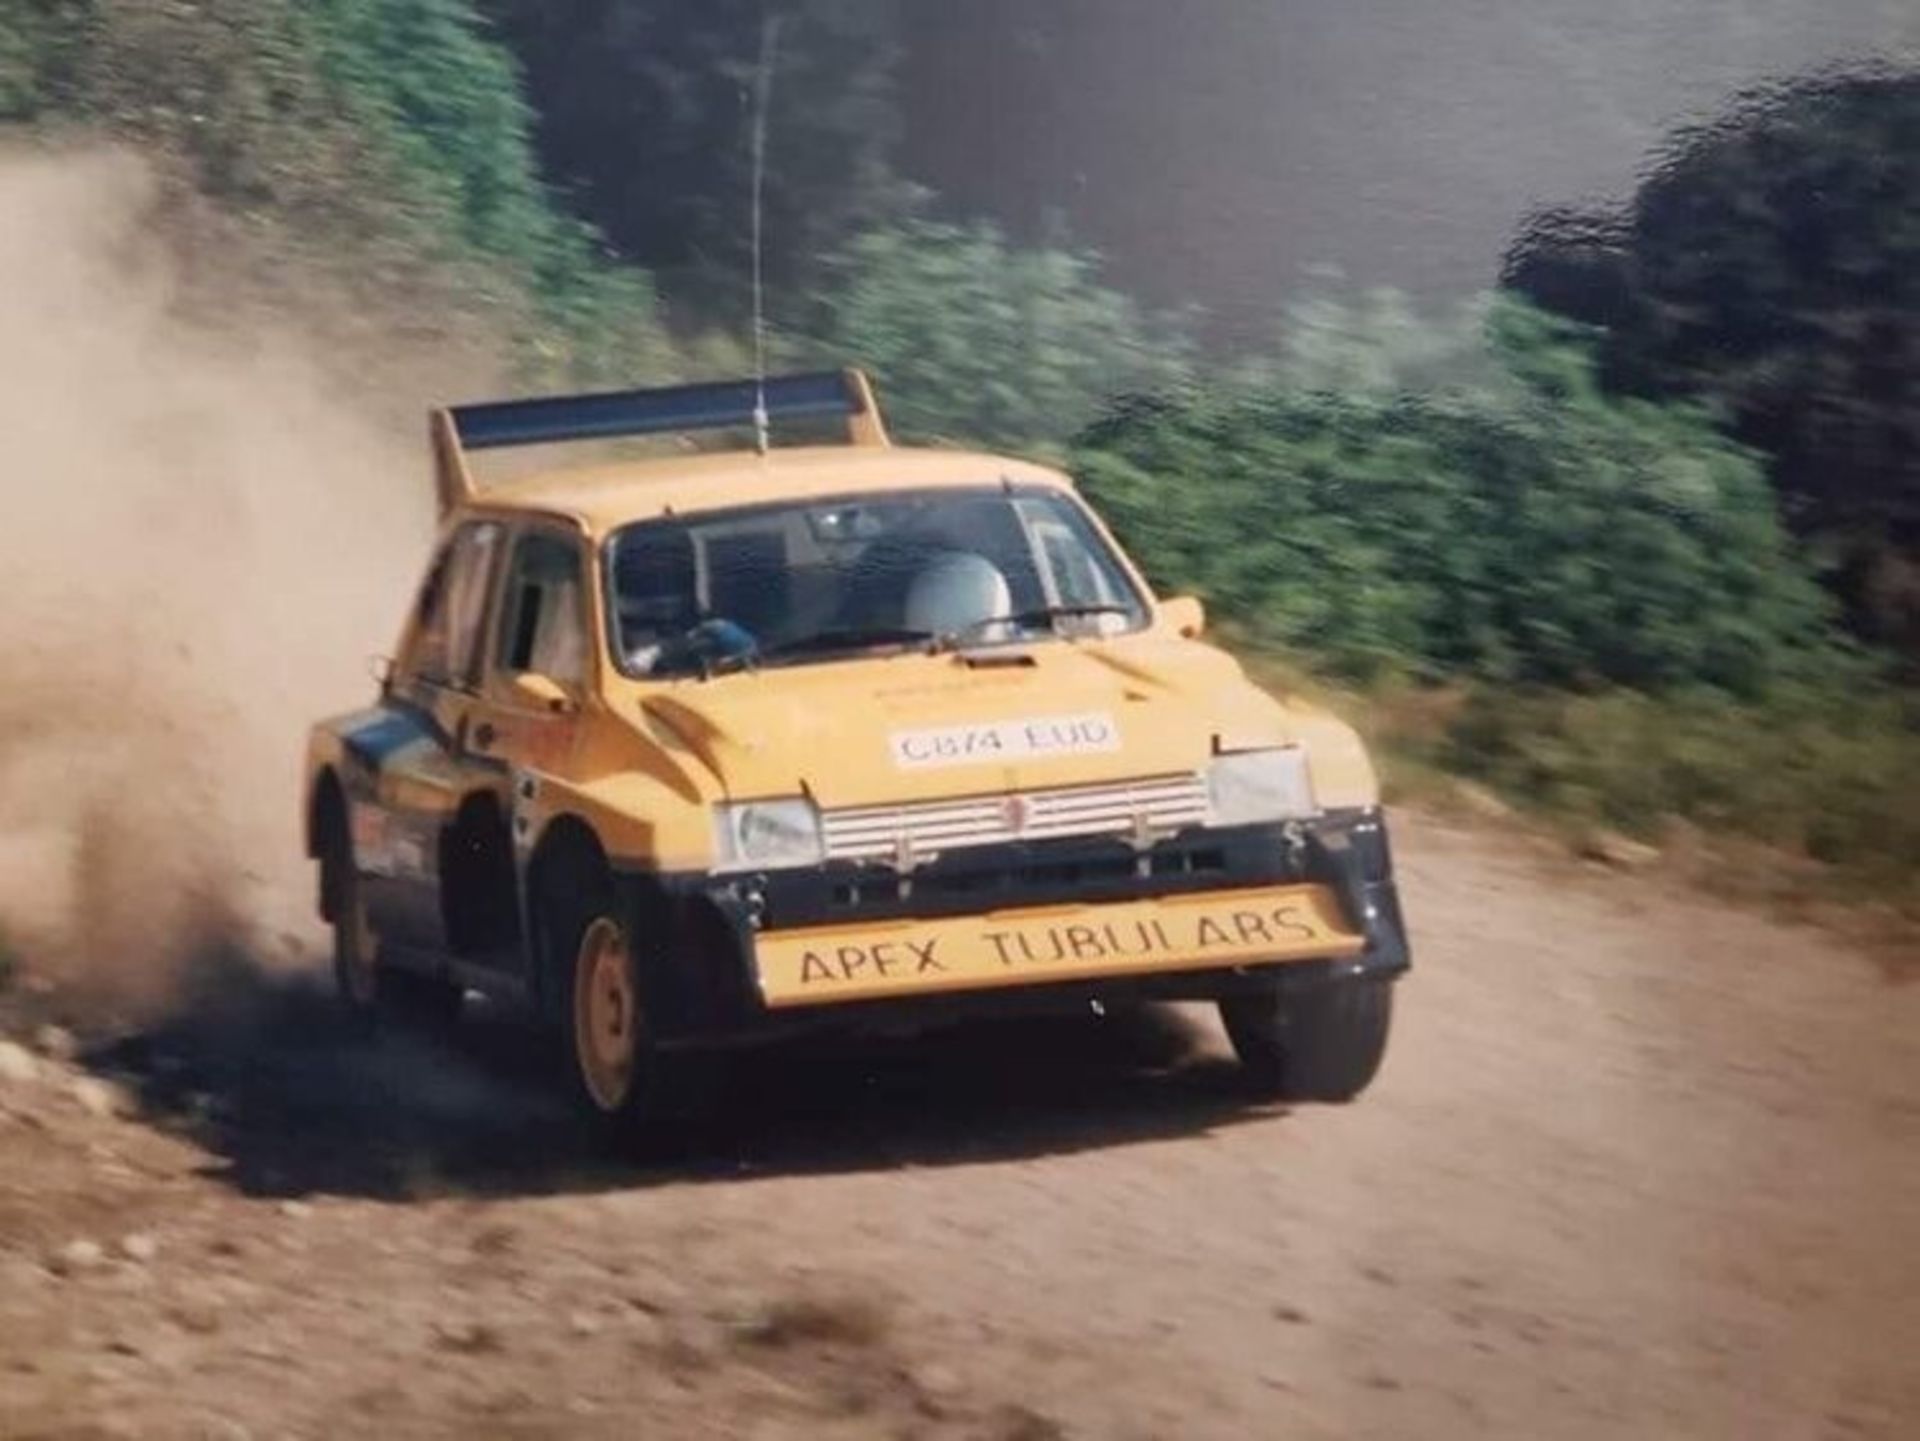 1985 MG Metro 6R4 Works Rally Car Registration Number: C874 EUD Chassis Number: #134  The MG Metro - Image 9 of 31